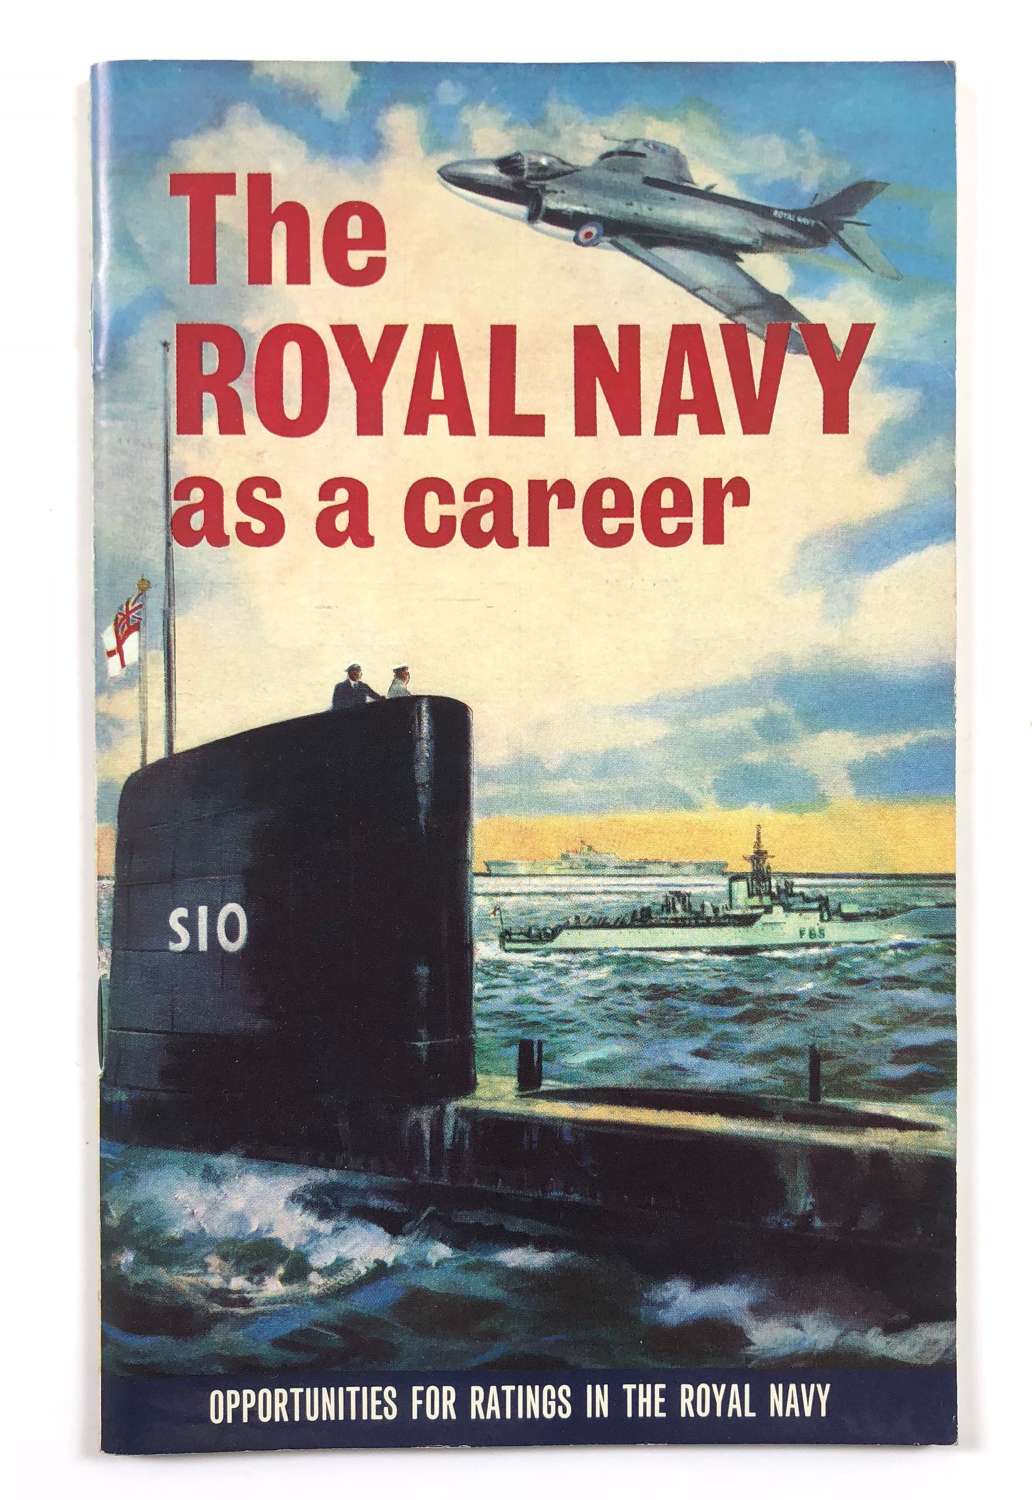 Royal Navy Cold War Period Recruiting Booklet.